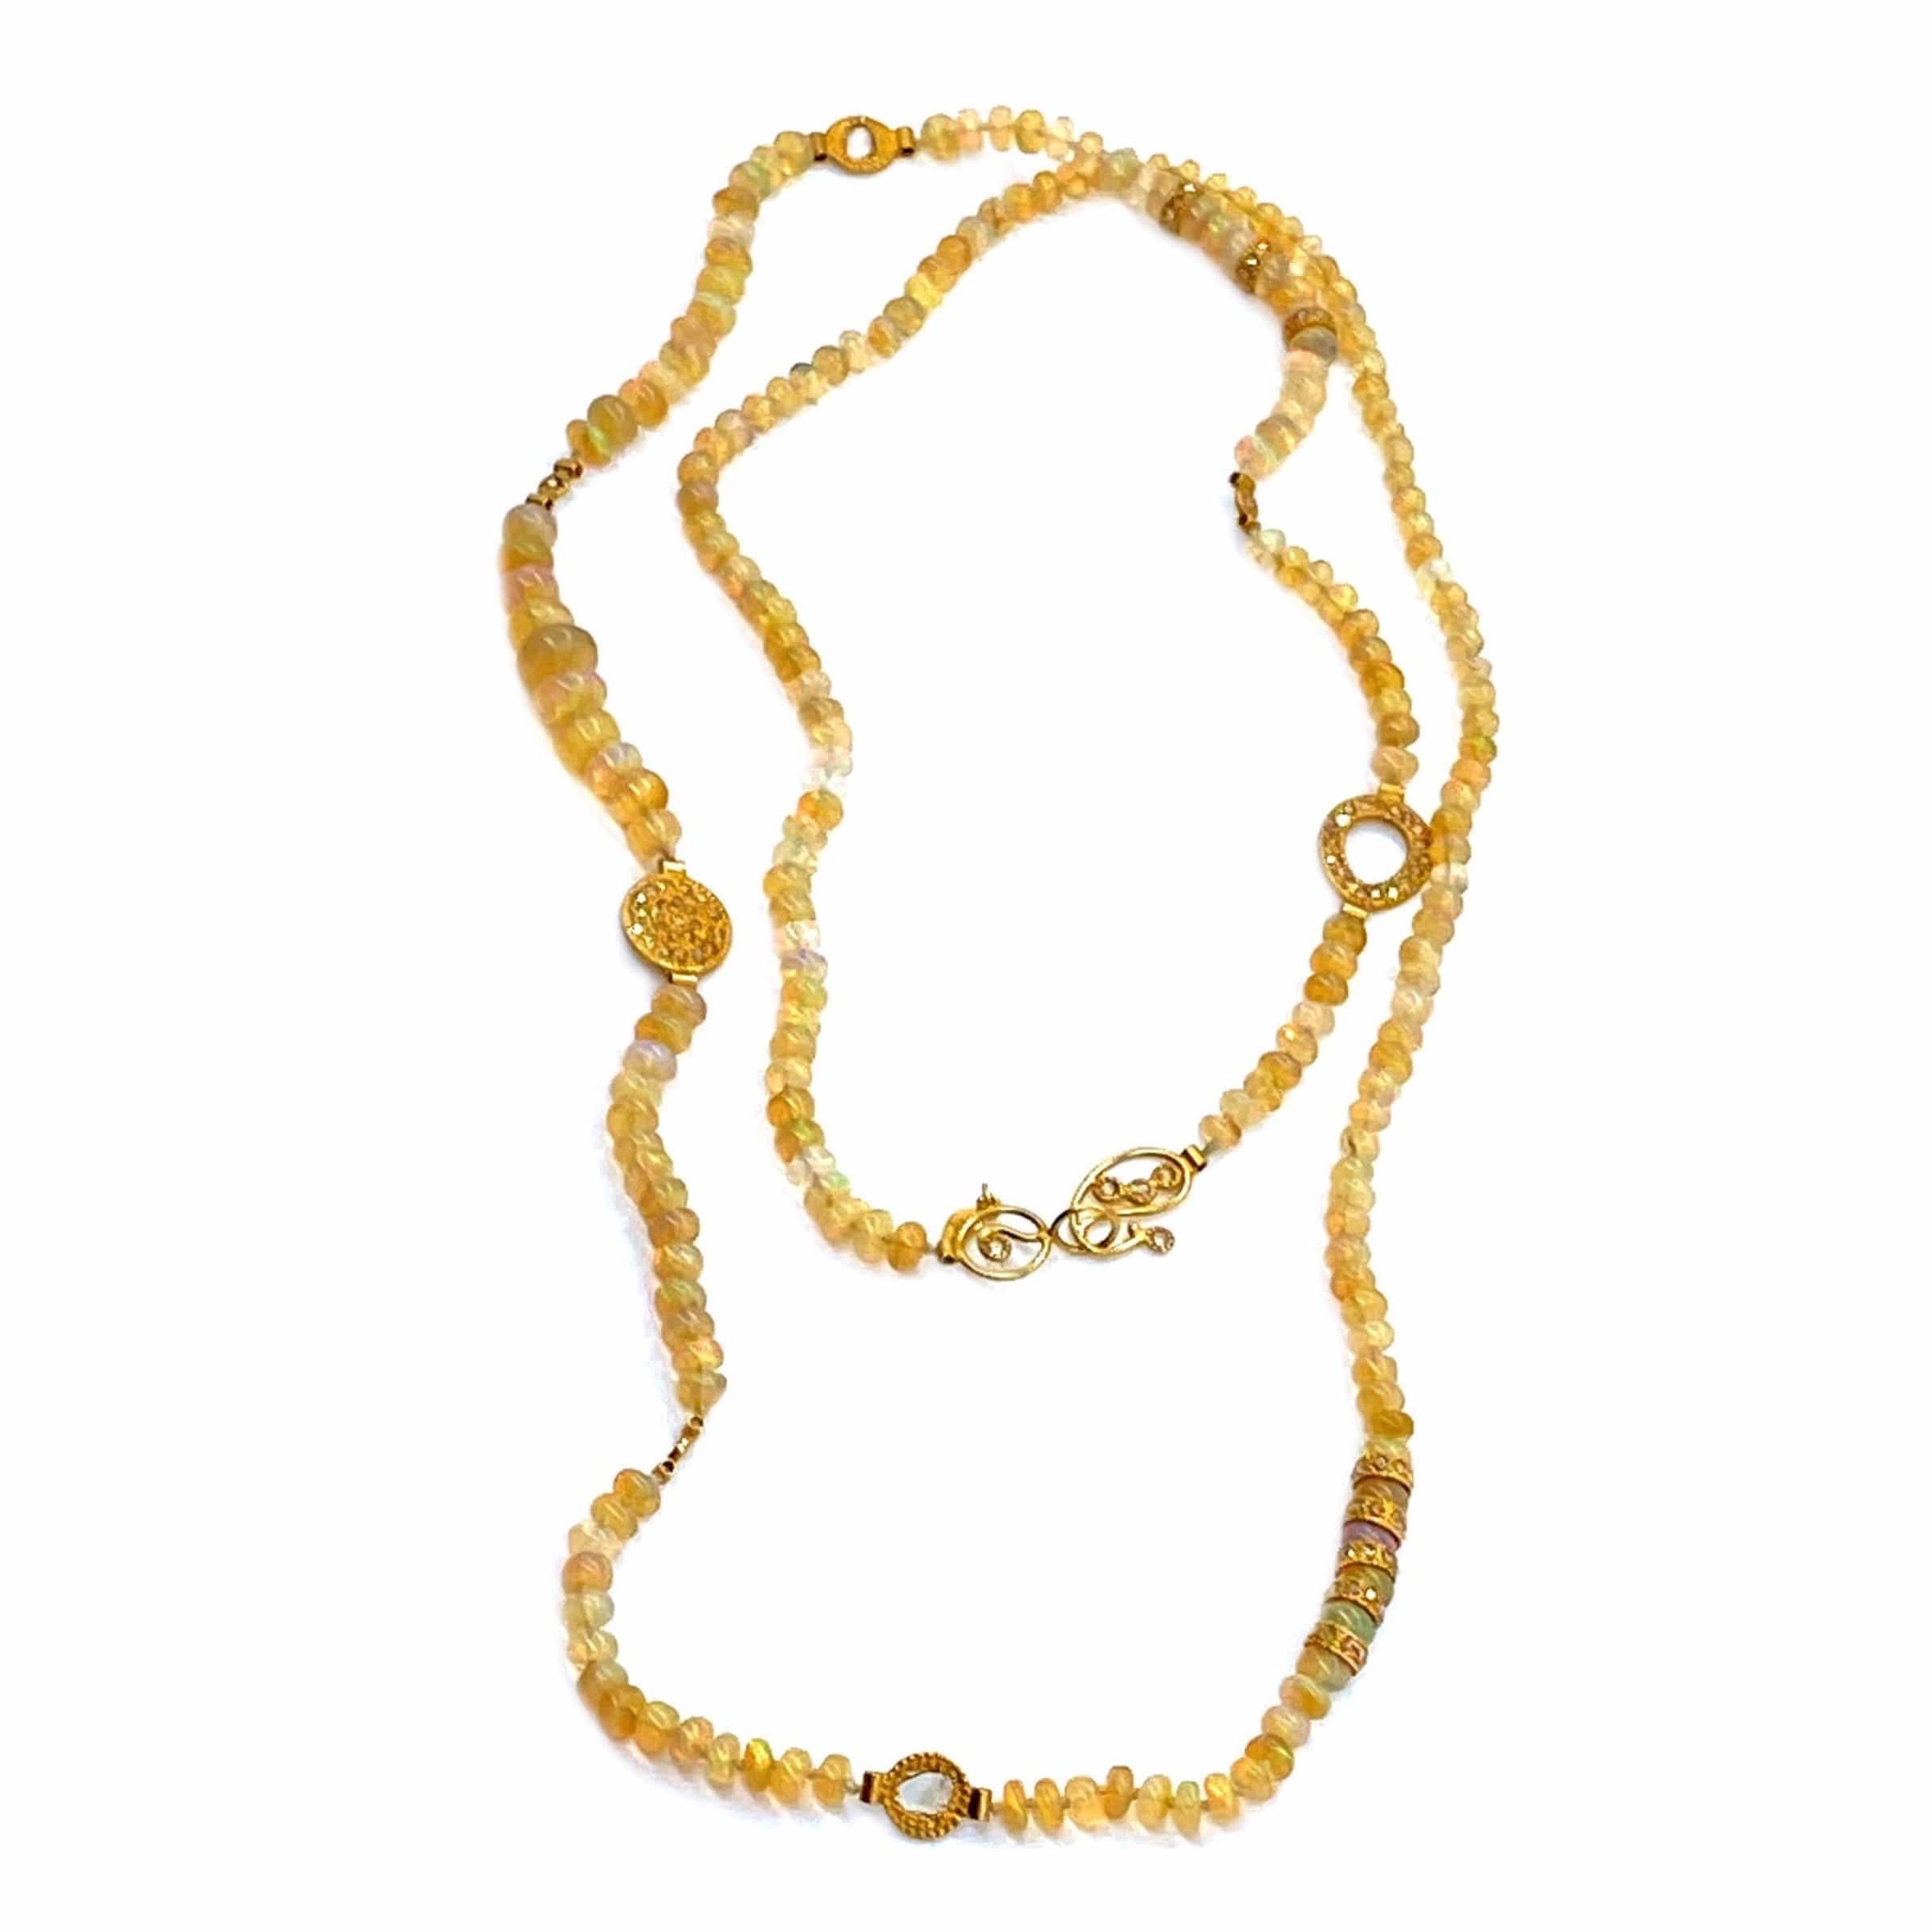 20K Affinity Opal Beads Long Necklace - Coomi